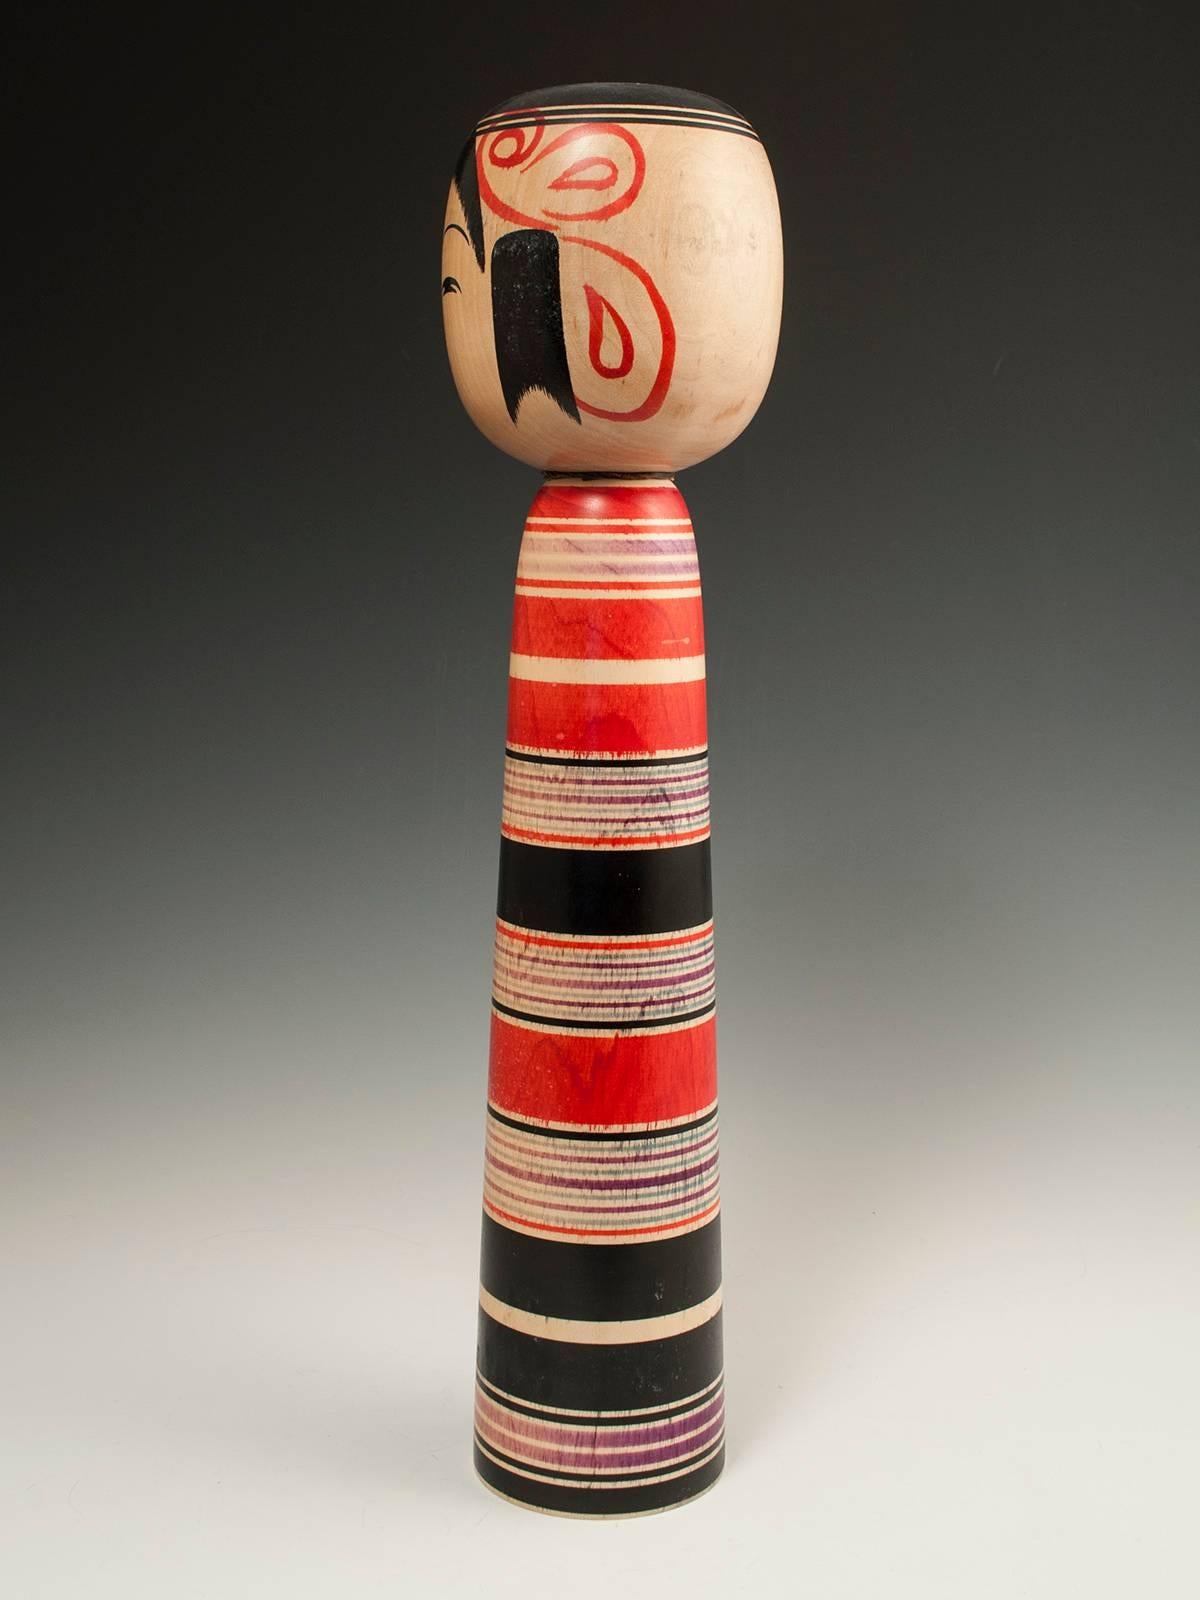 Offered by Zena Kruzick
Midcentury traditional Kokeshi doll from Tsuchiyu, Japan.

A classic traditional kokeshi doll signed by Imaizumi Genji (1934-). 
Kokeshi from the Tsuchiyu area of Japan are characteristically decorated with stripes, which are